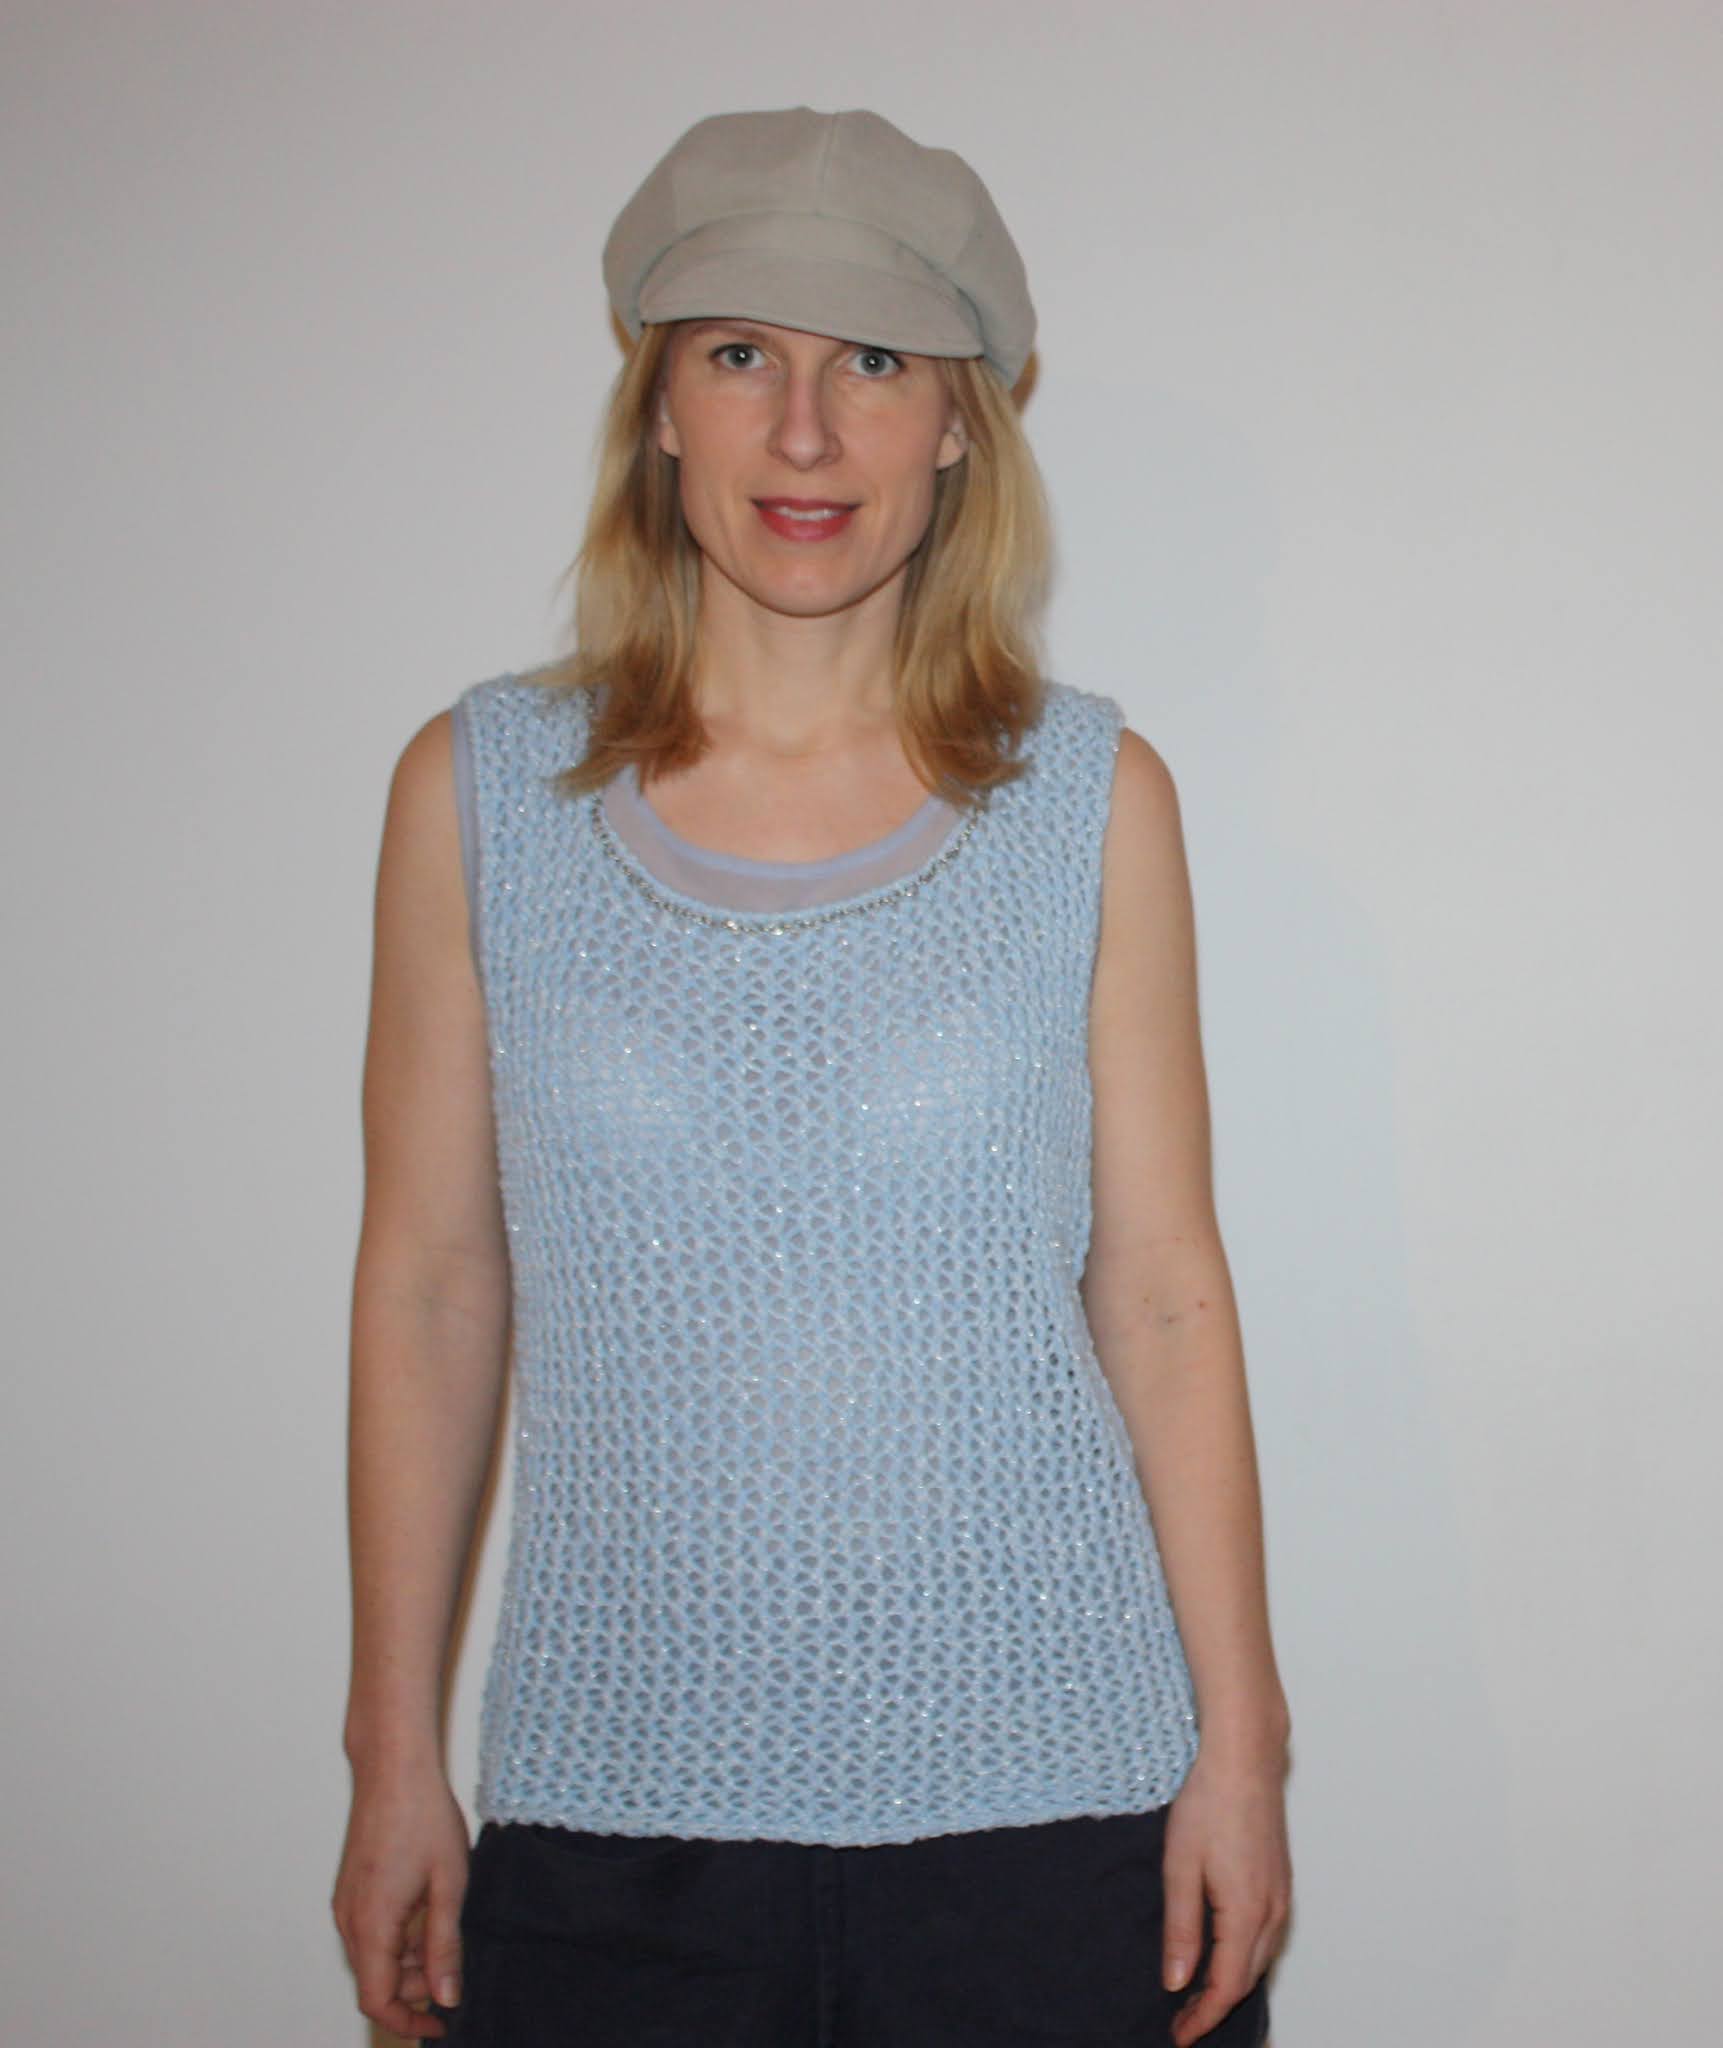 Craftrebella: Pale blue knitted Mesh Top